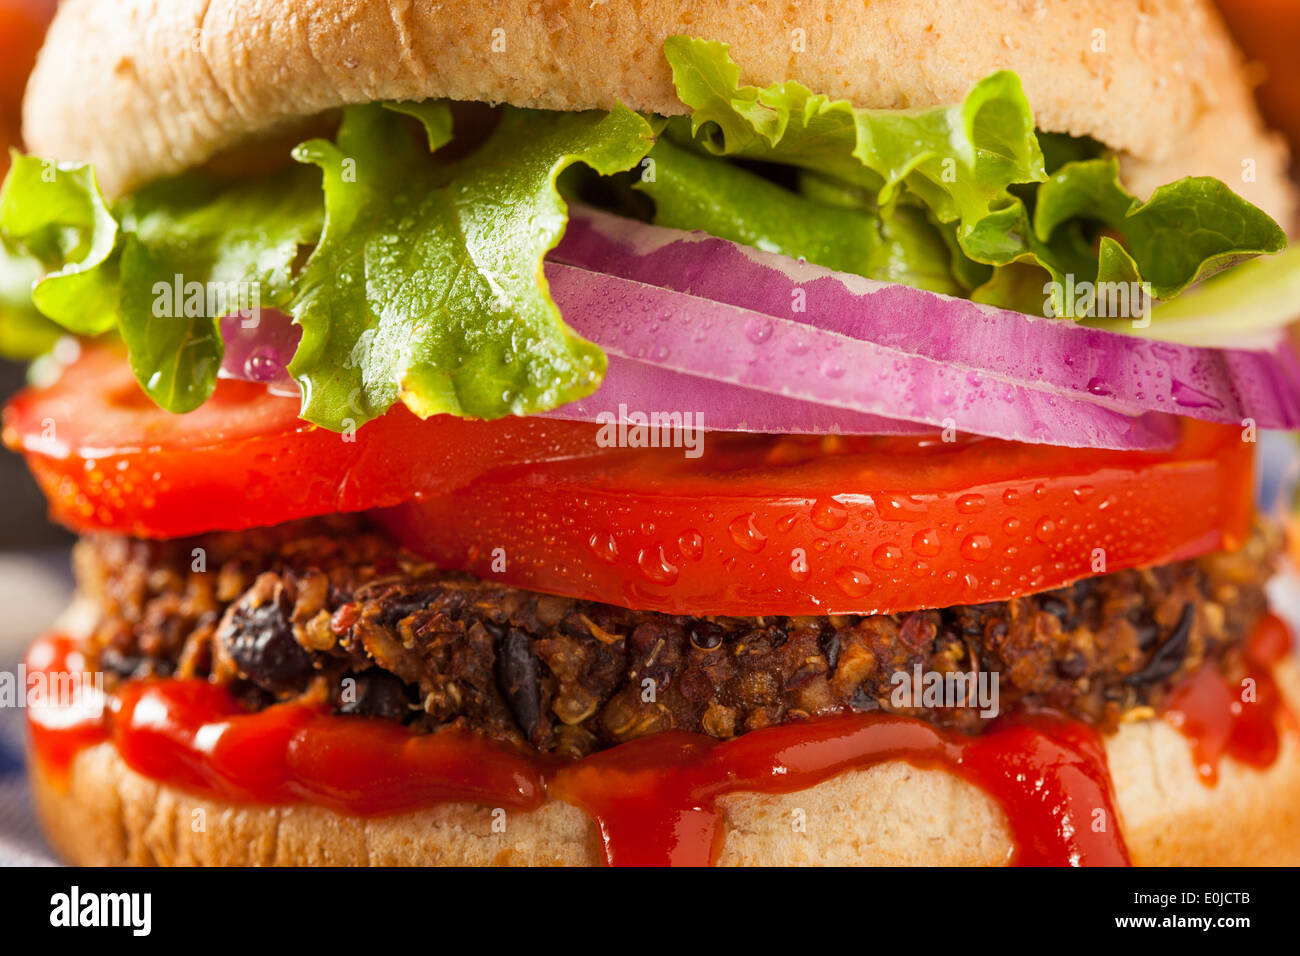 Homemade Healthy Vegetarian Quinoa Burger with Lettuce and Tomato Stock Photo